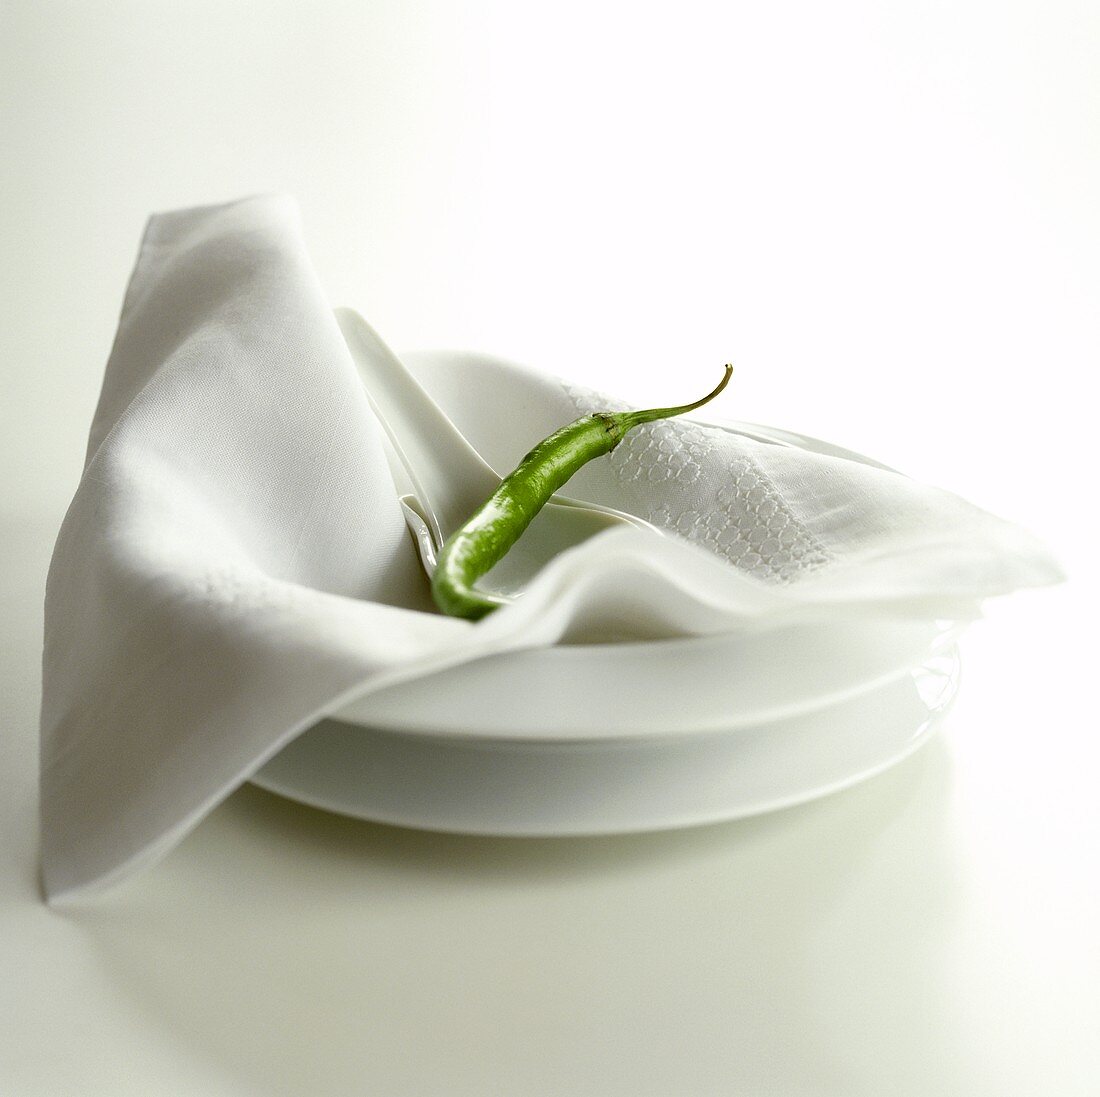 A green chili pepper on napkin and plate